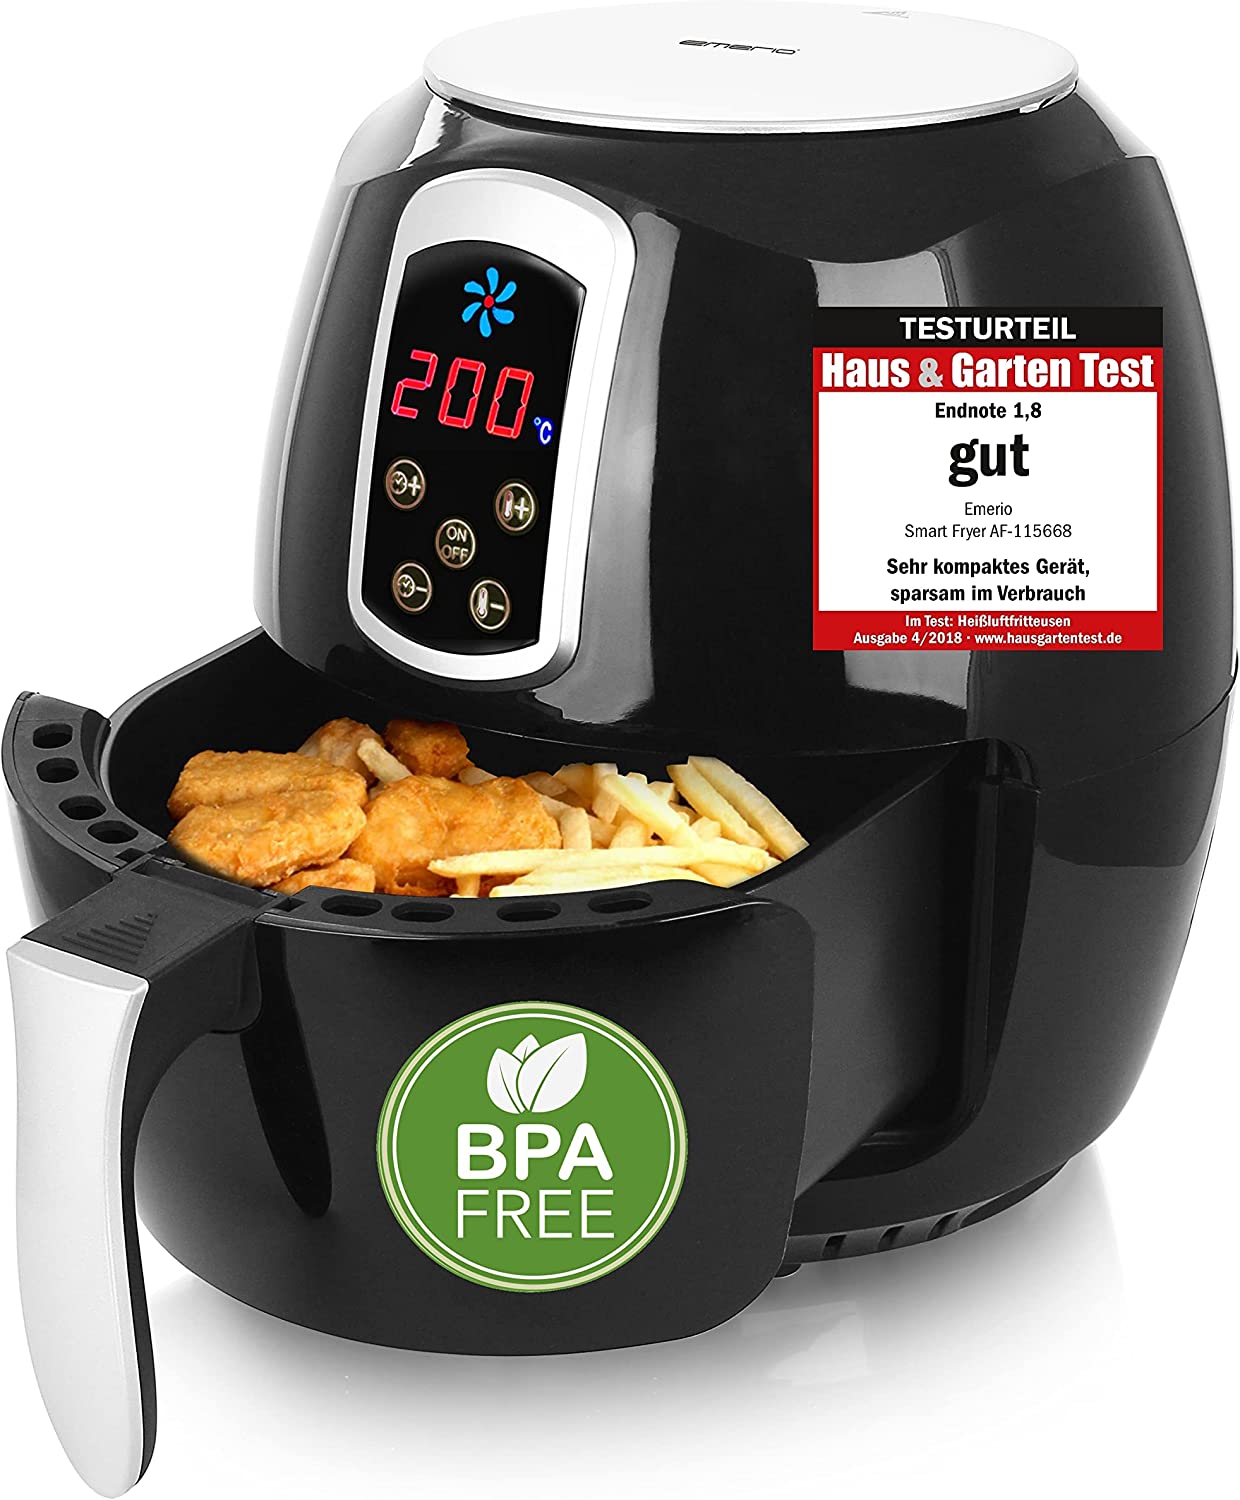 Emerio AF-126668 Hot Air Fryer, Airfryer, Smart Fry, Test Gut, Digital Display, Soft Touch Buttons, Healthy Fry Without Oil, Easy to Clean, 3.6 Lites, BPA Free, Mini Oven, Black